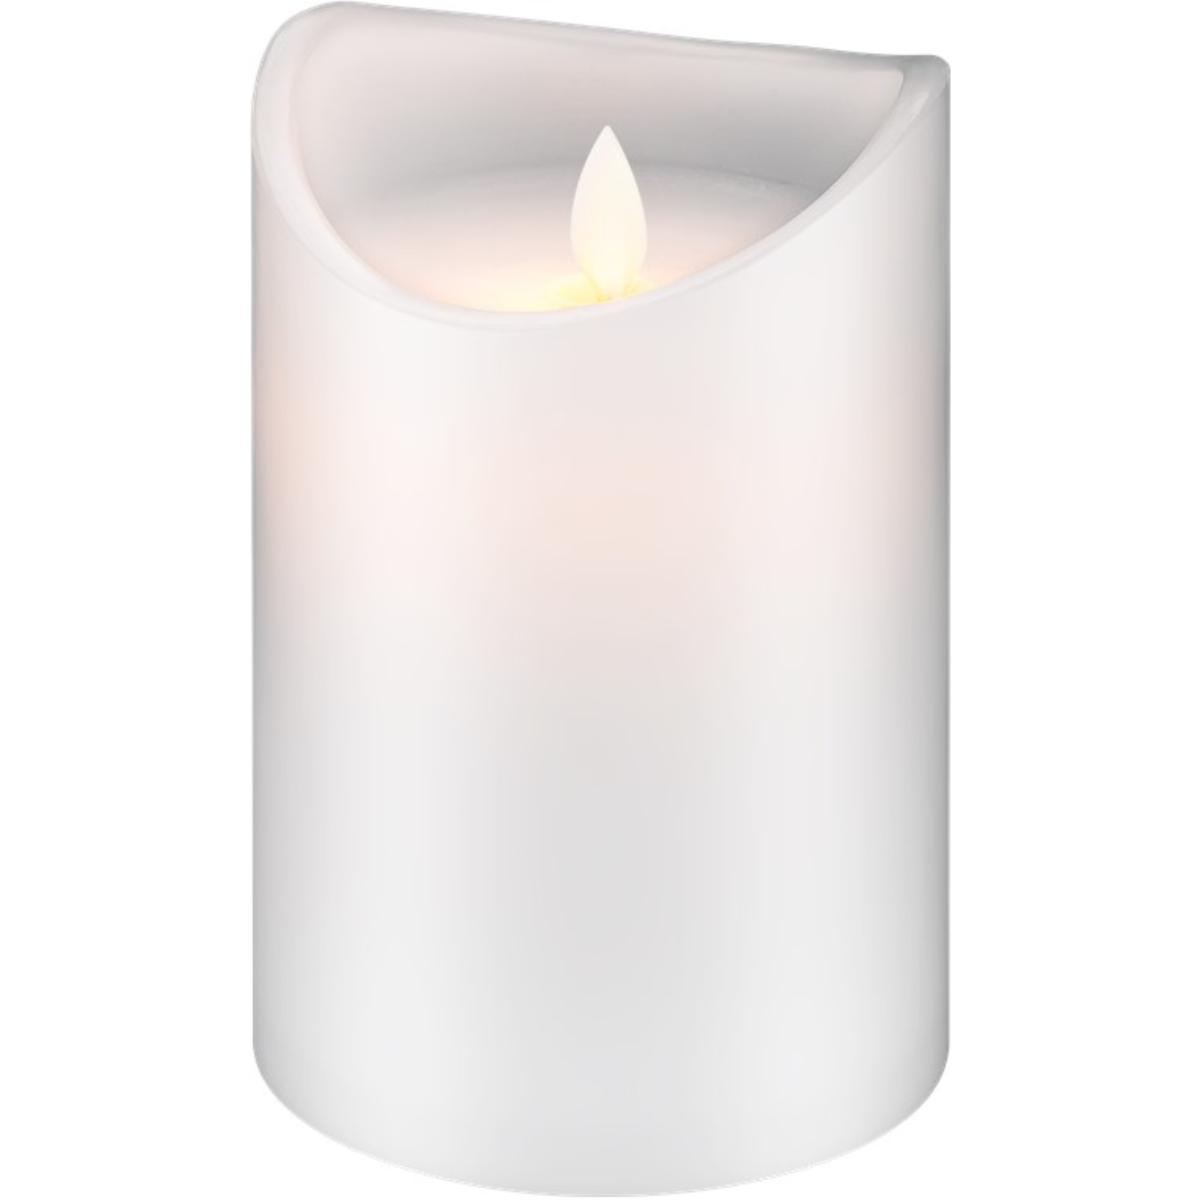 LED white real wax candle, 10 x 15 cm beautiful and safe lighting solu